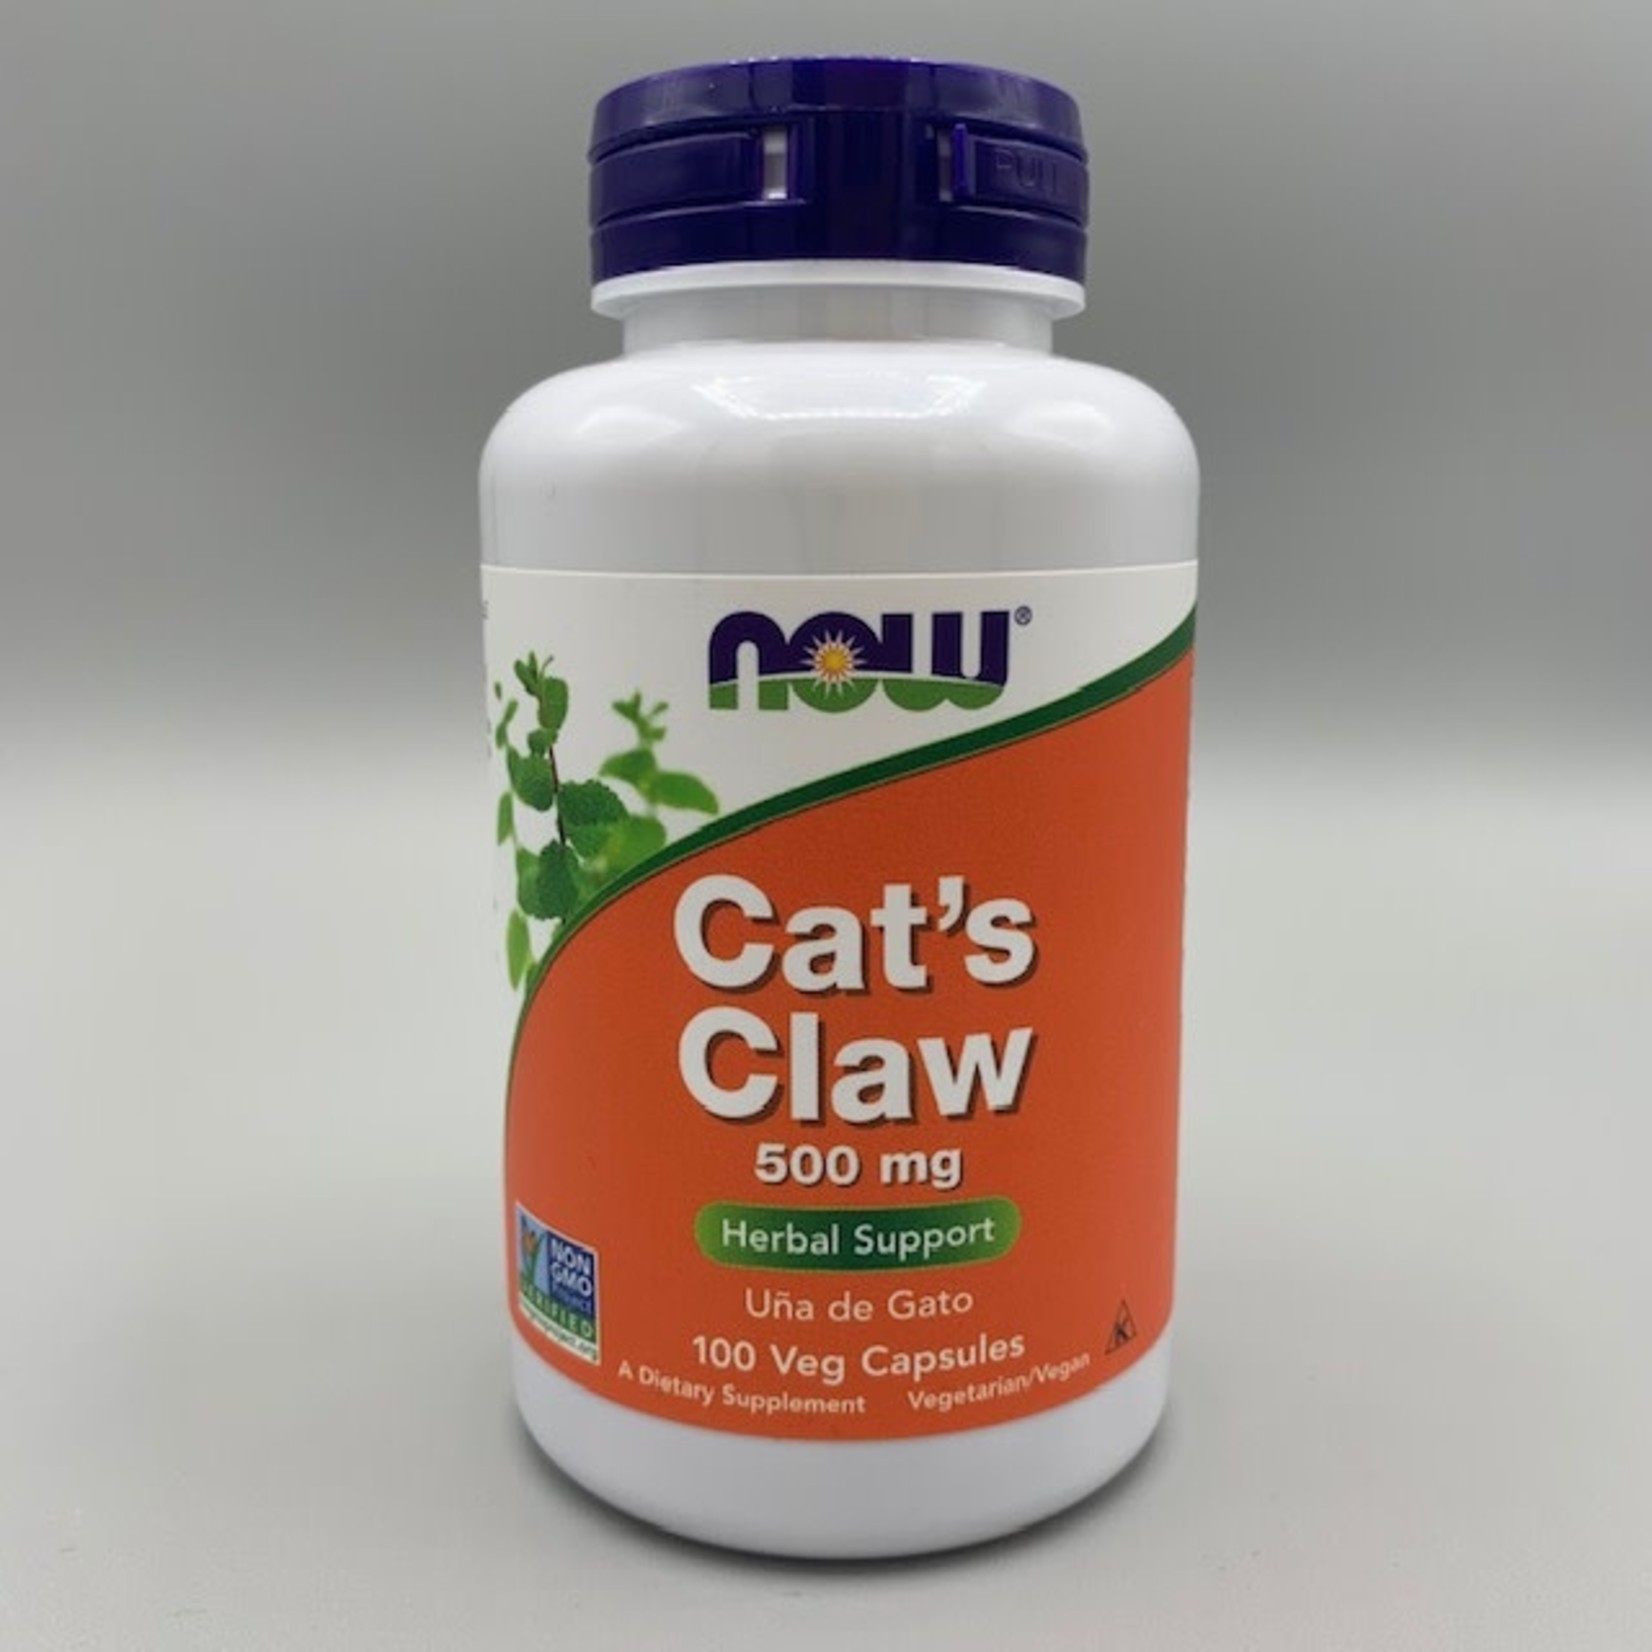 NOW Cat's Claw - 500 mg, 100 Veg. Capsules